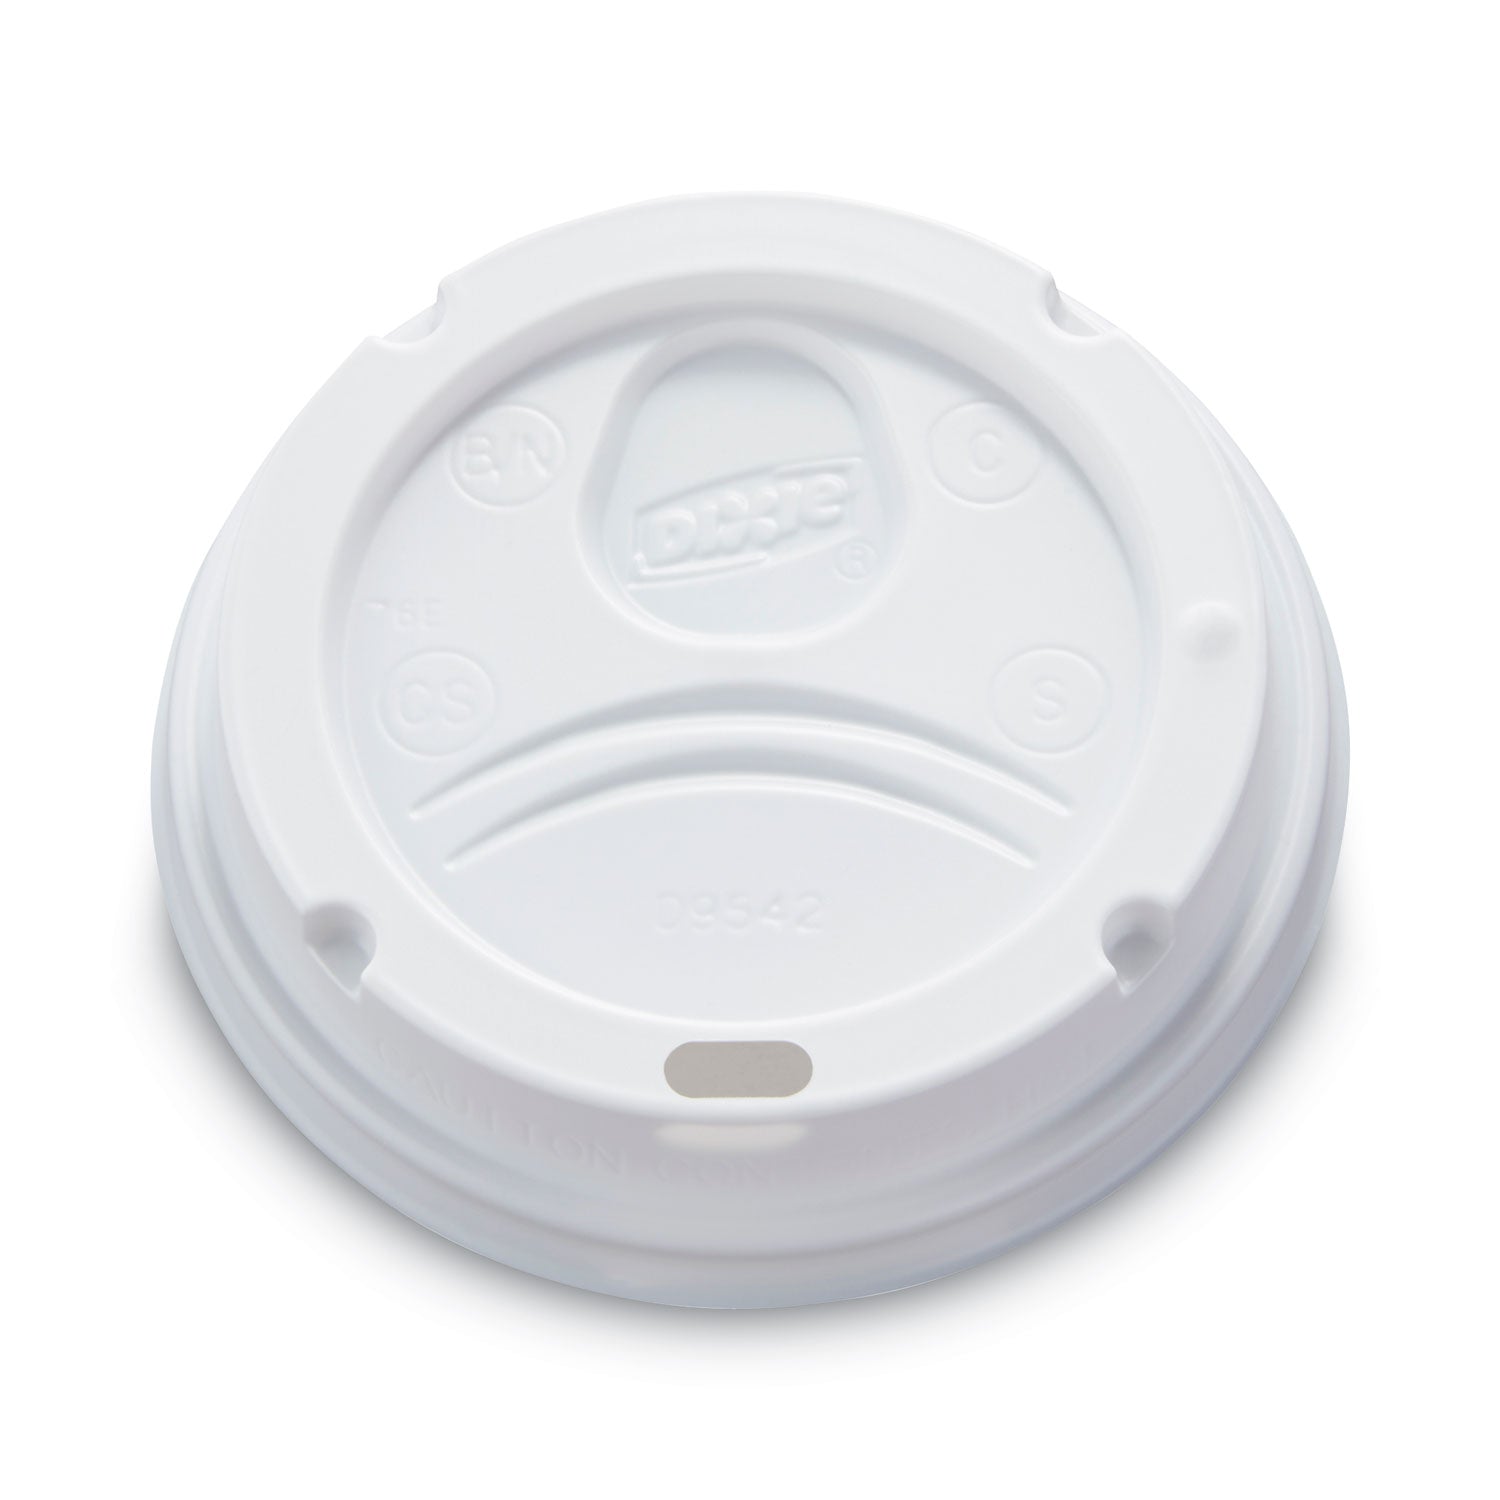 Dome Drink-Thru Lids, Fits 10 oz to 16 oz PerfecTouch; 12 oz to 20 oz WiseSize Cup, White, 50/Pack - 